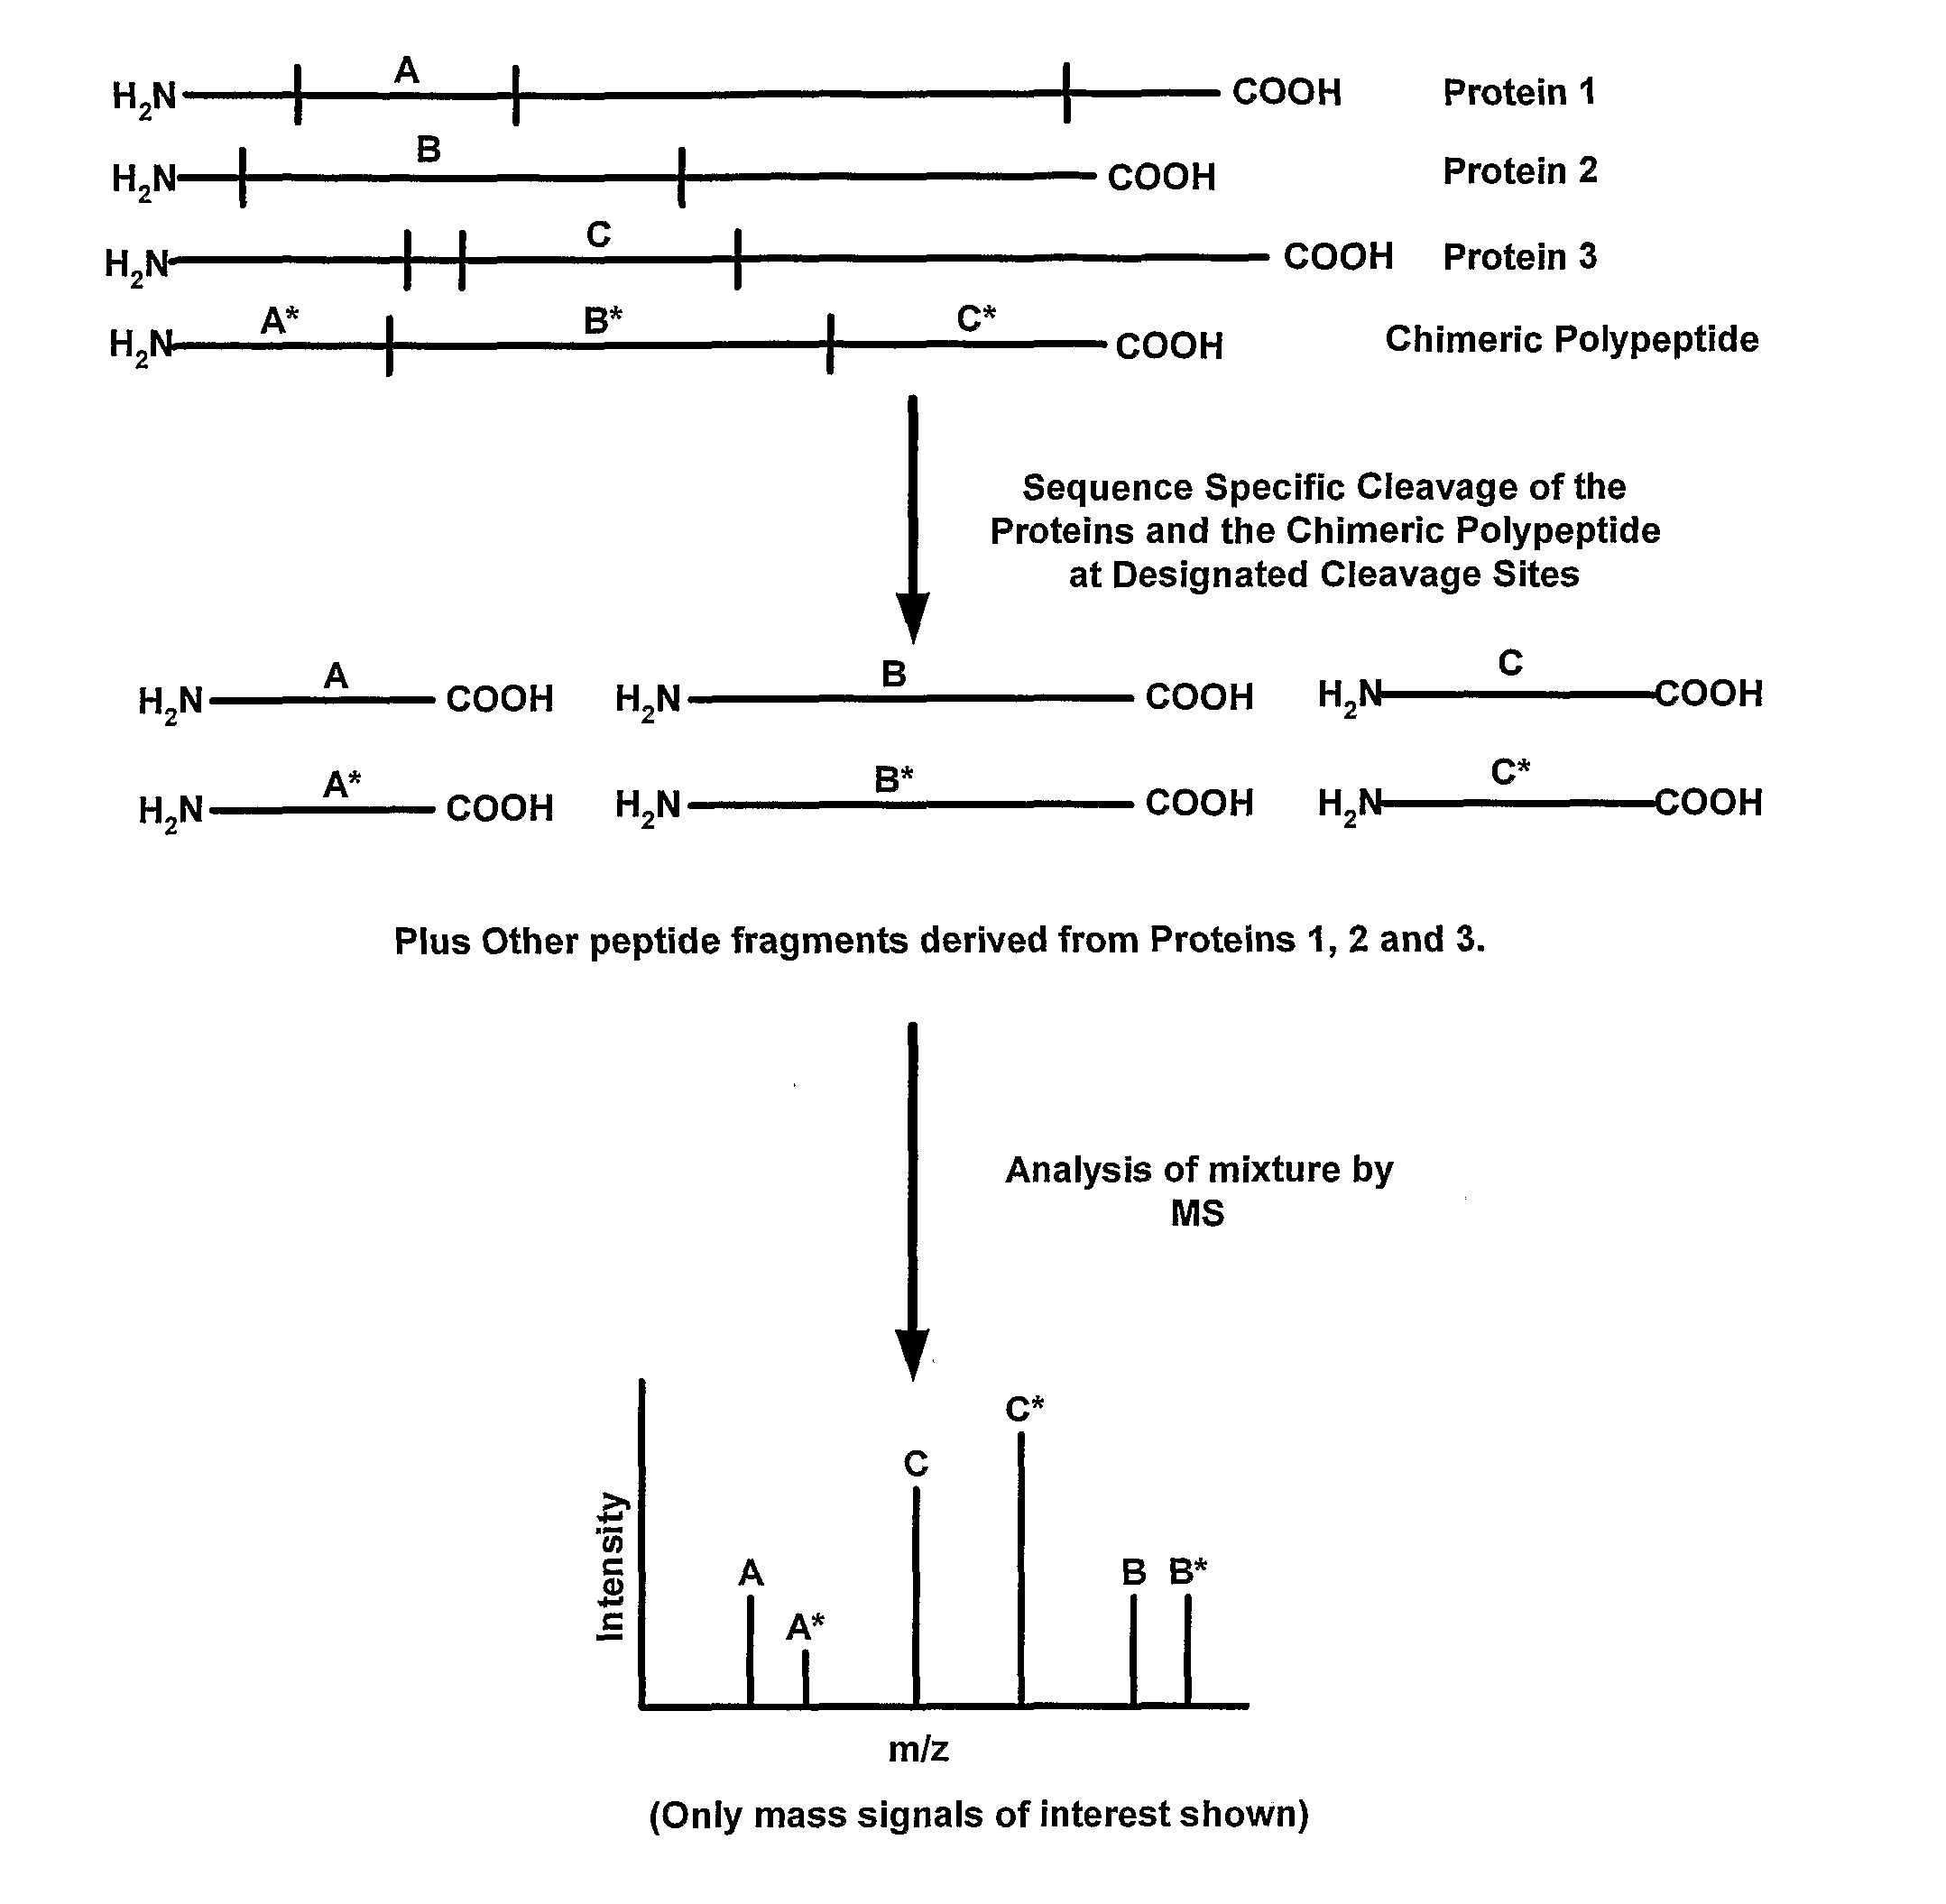 Methods For Making And Using Mass Tag Standards For Quantitative Proteomics